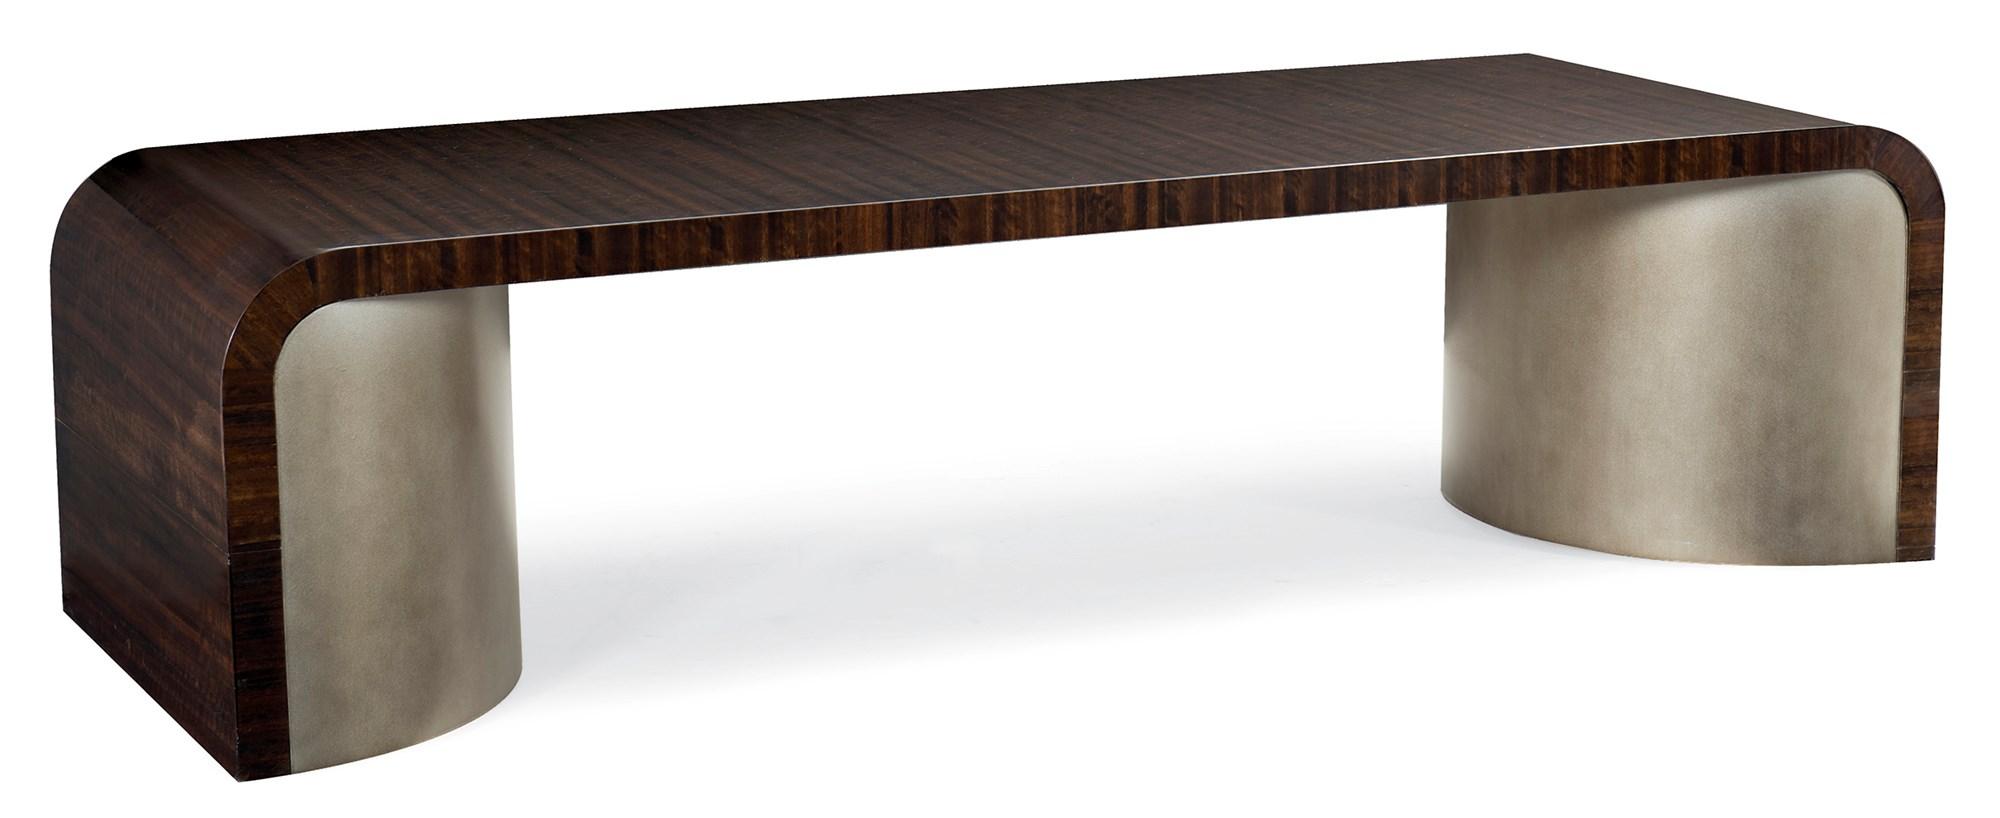 Contemporary Coffee Table STREAMLINE COCKTAIL TABLE M021-417-402 in Brown, Bronze 